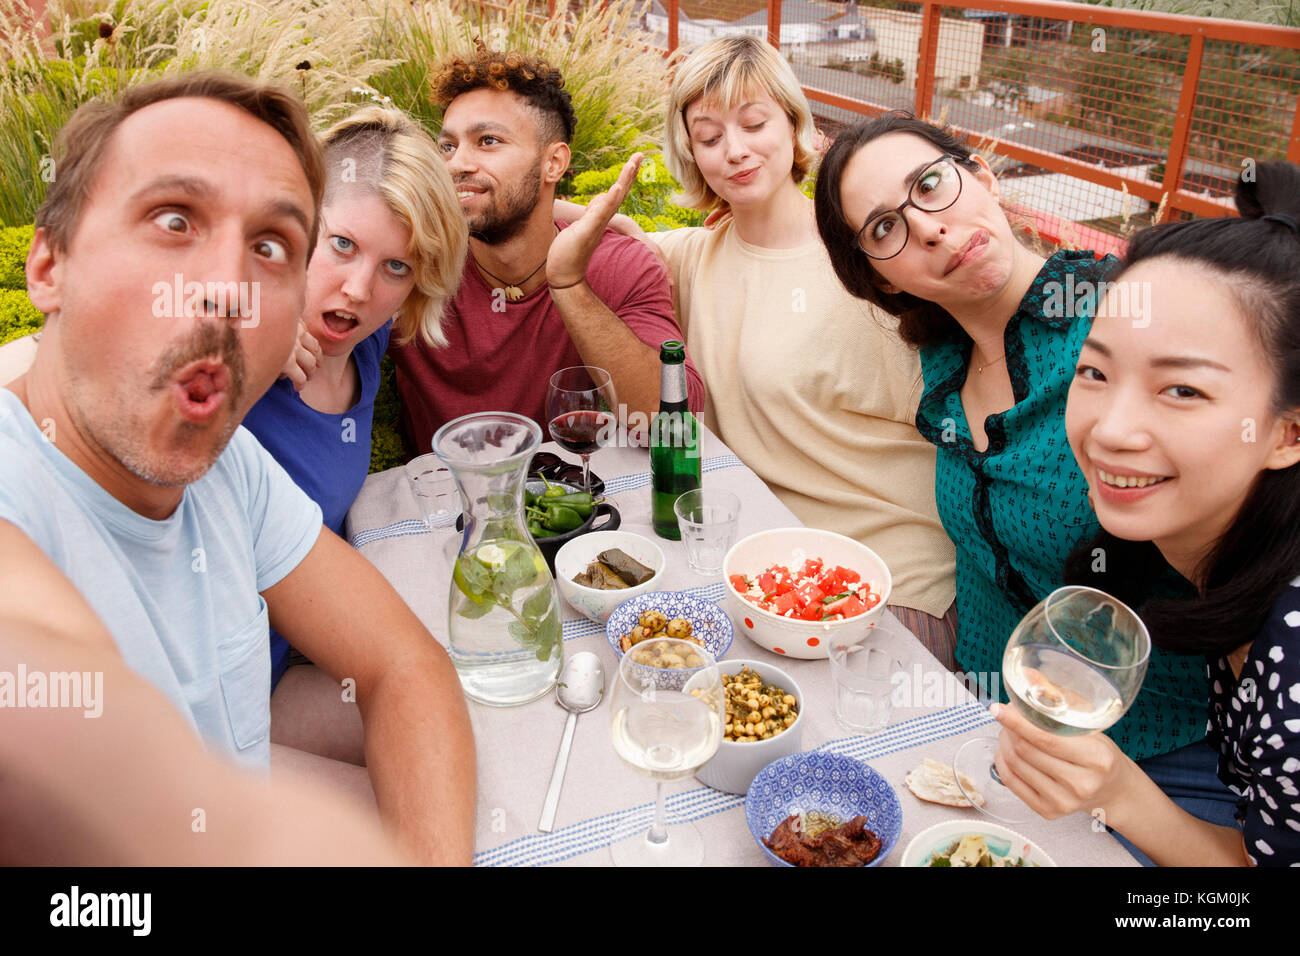 Portrait of playful friends making faces while sitting at outdoor table at patio Stock Photo